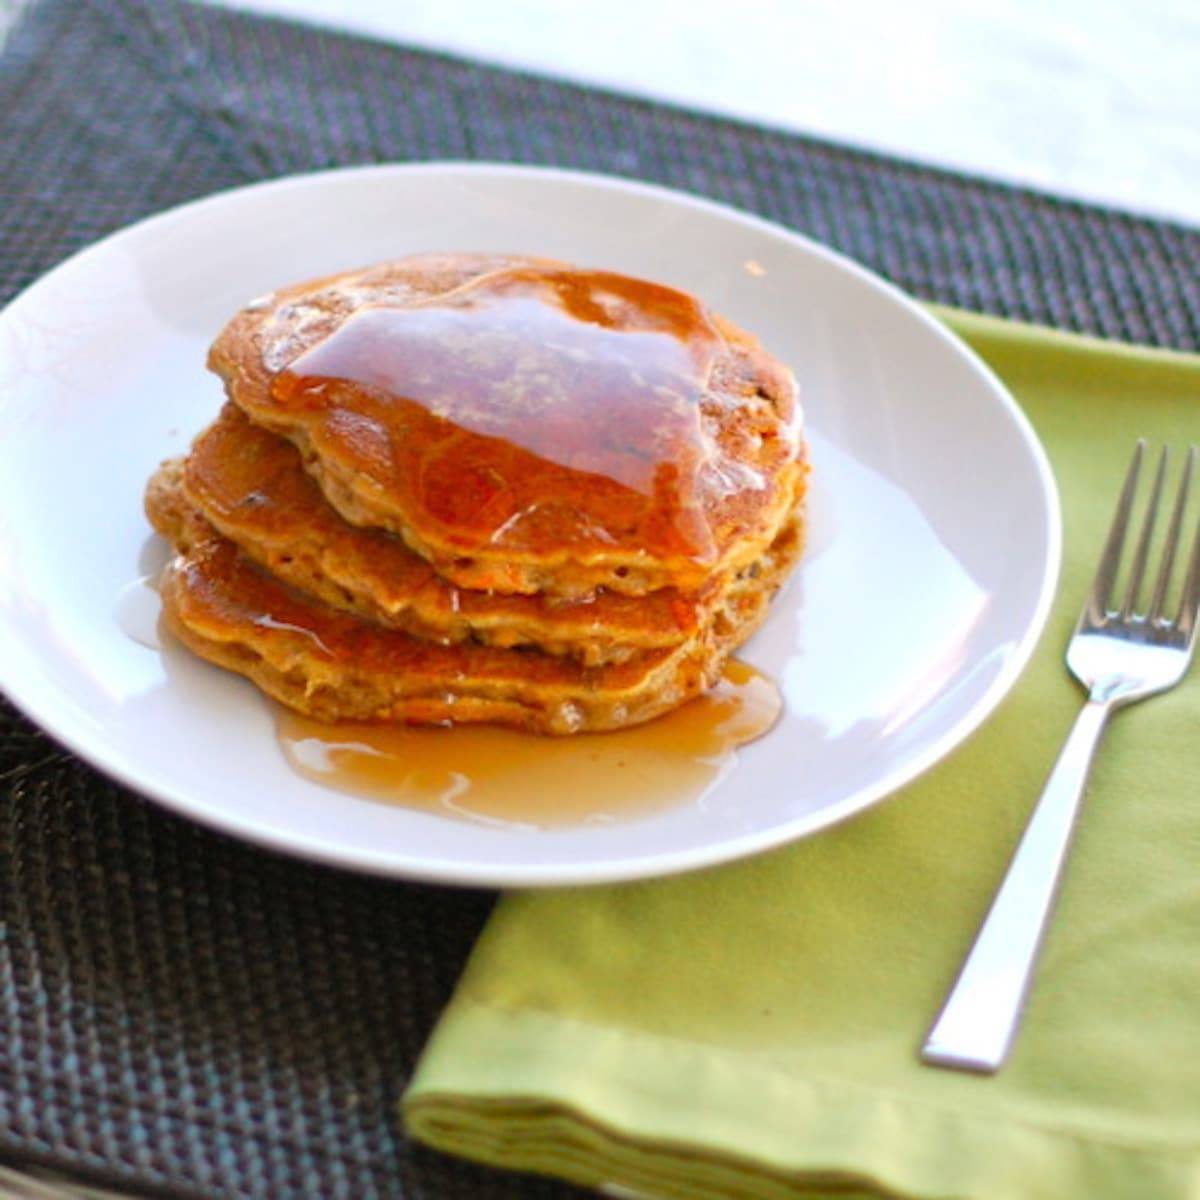 Cinnamon apple carrot pancakes on a white plate with a fork on a green napkin.